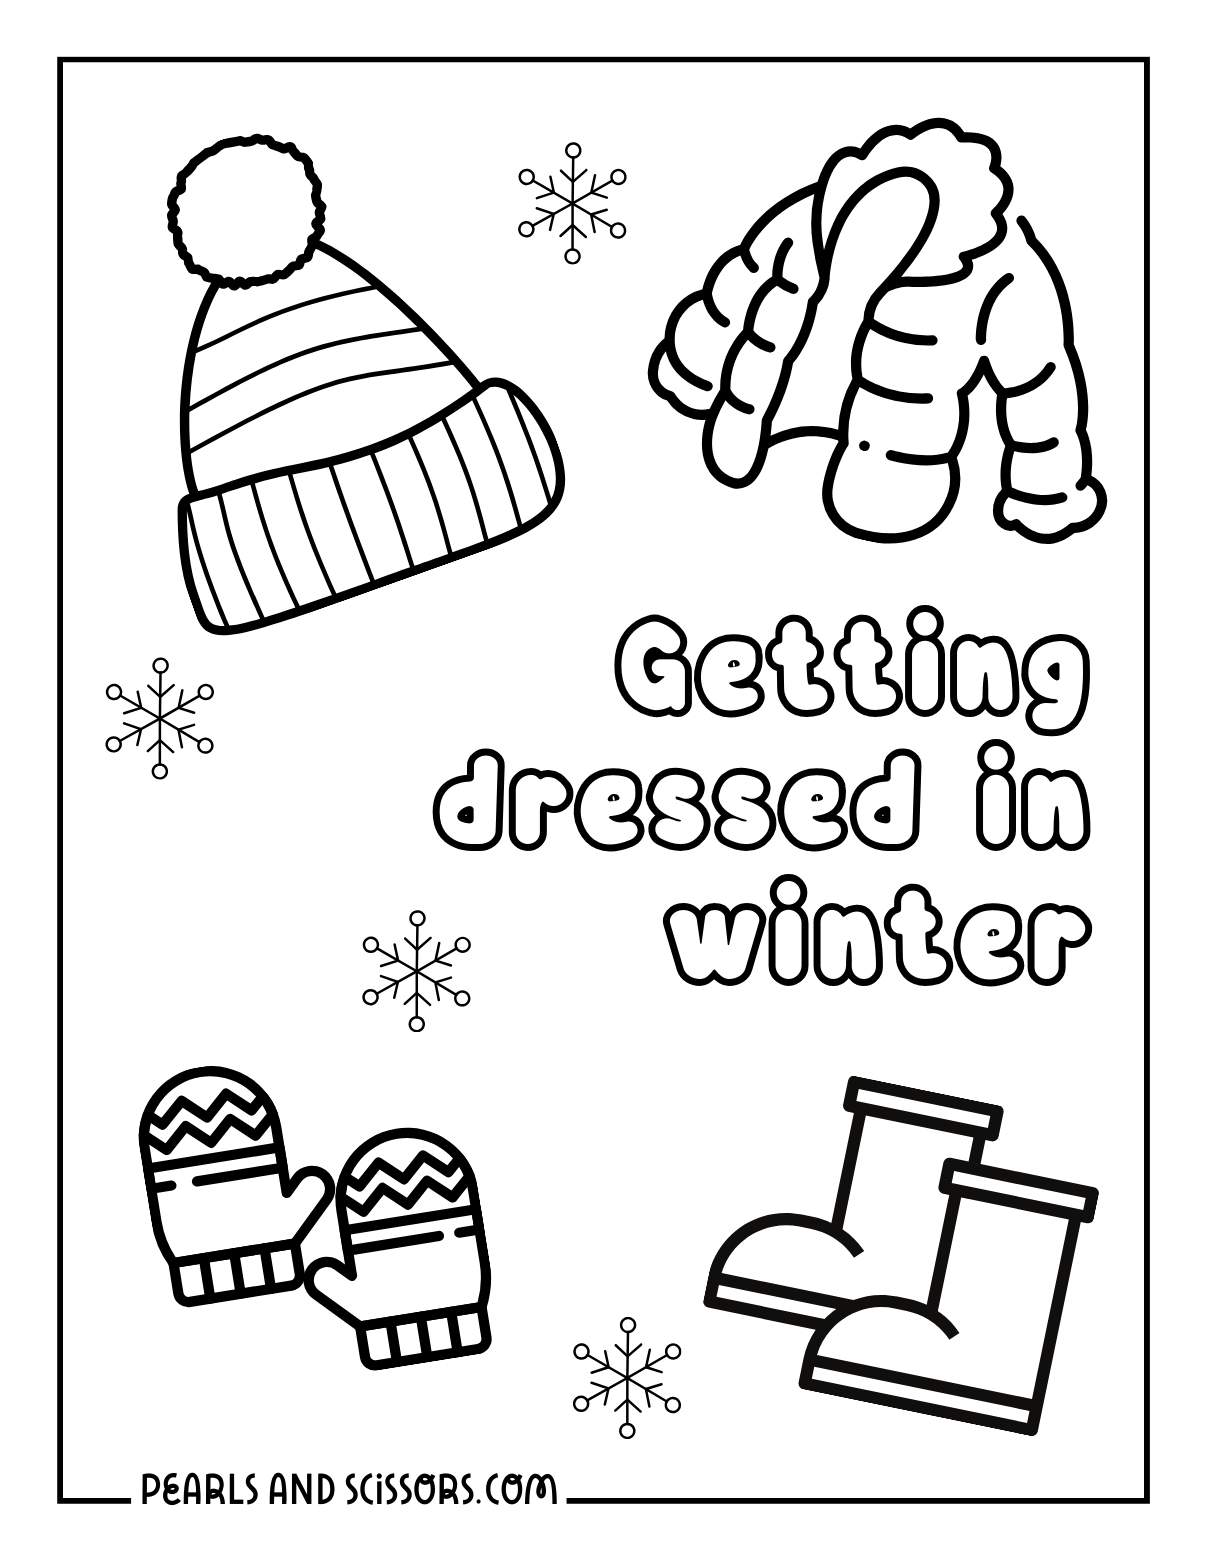 Winter outfits: a hat, jacket, boots and mittens coloring page for preschool.